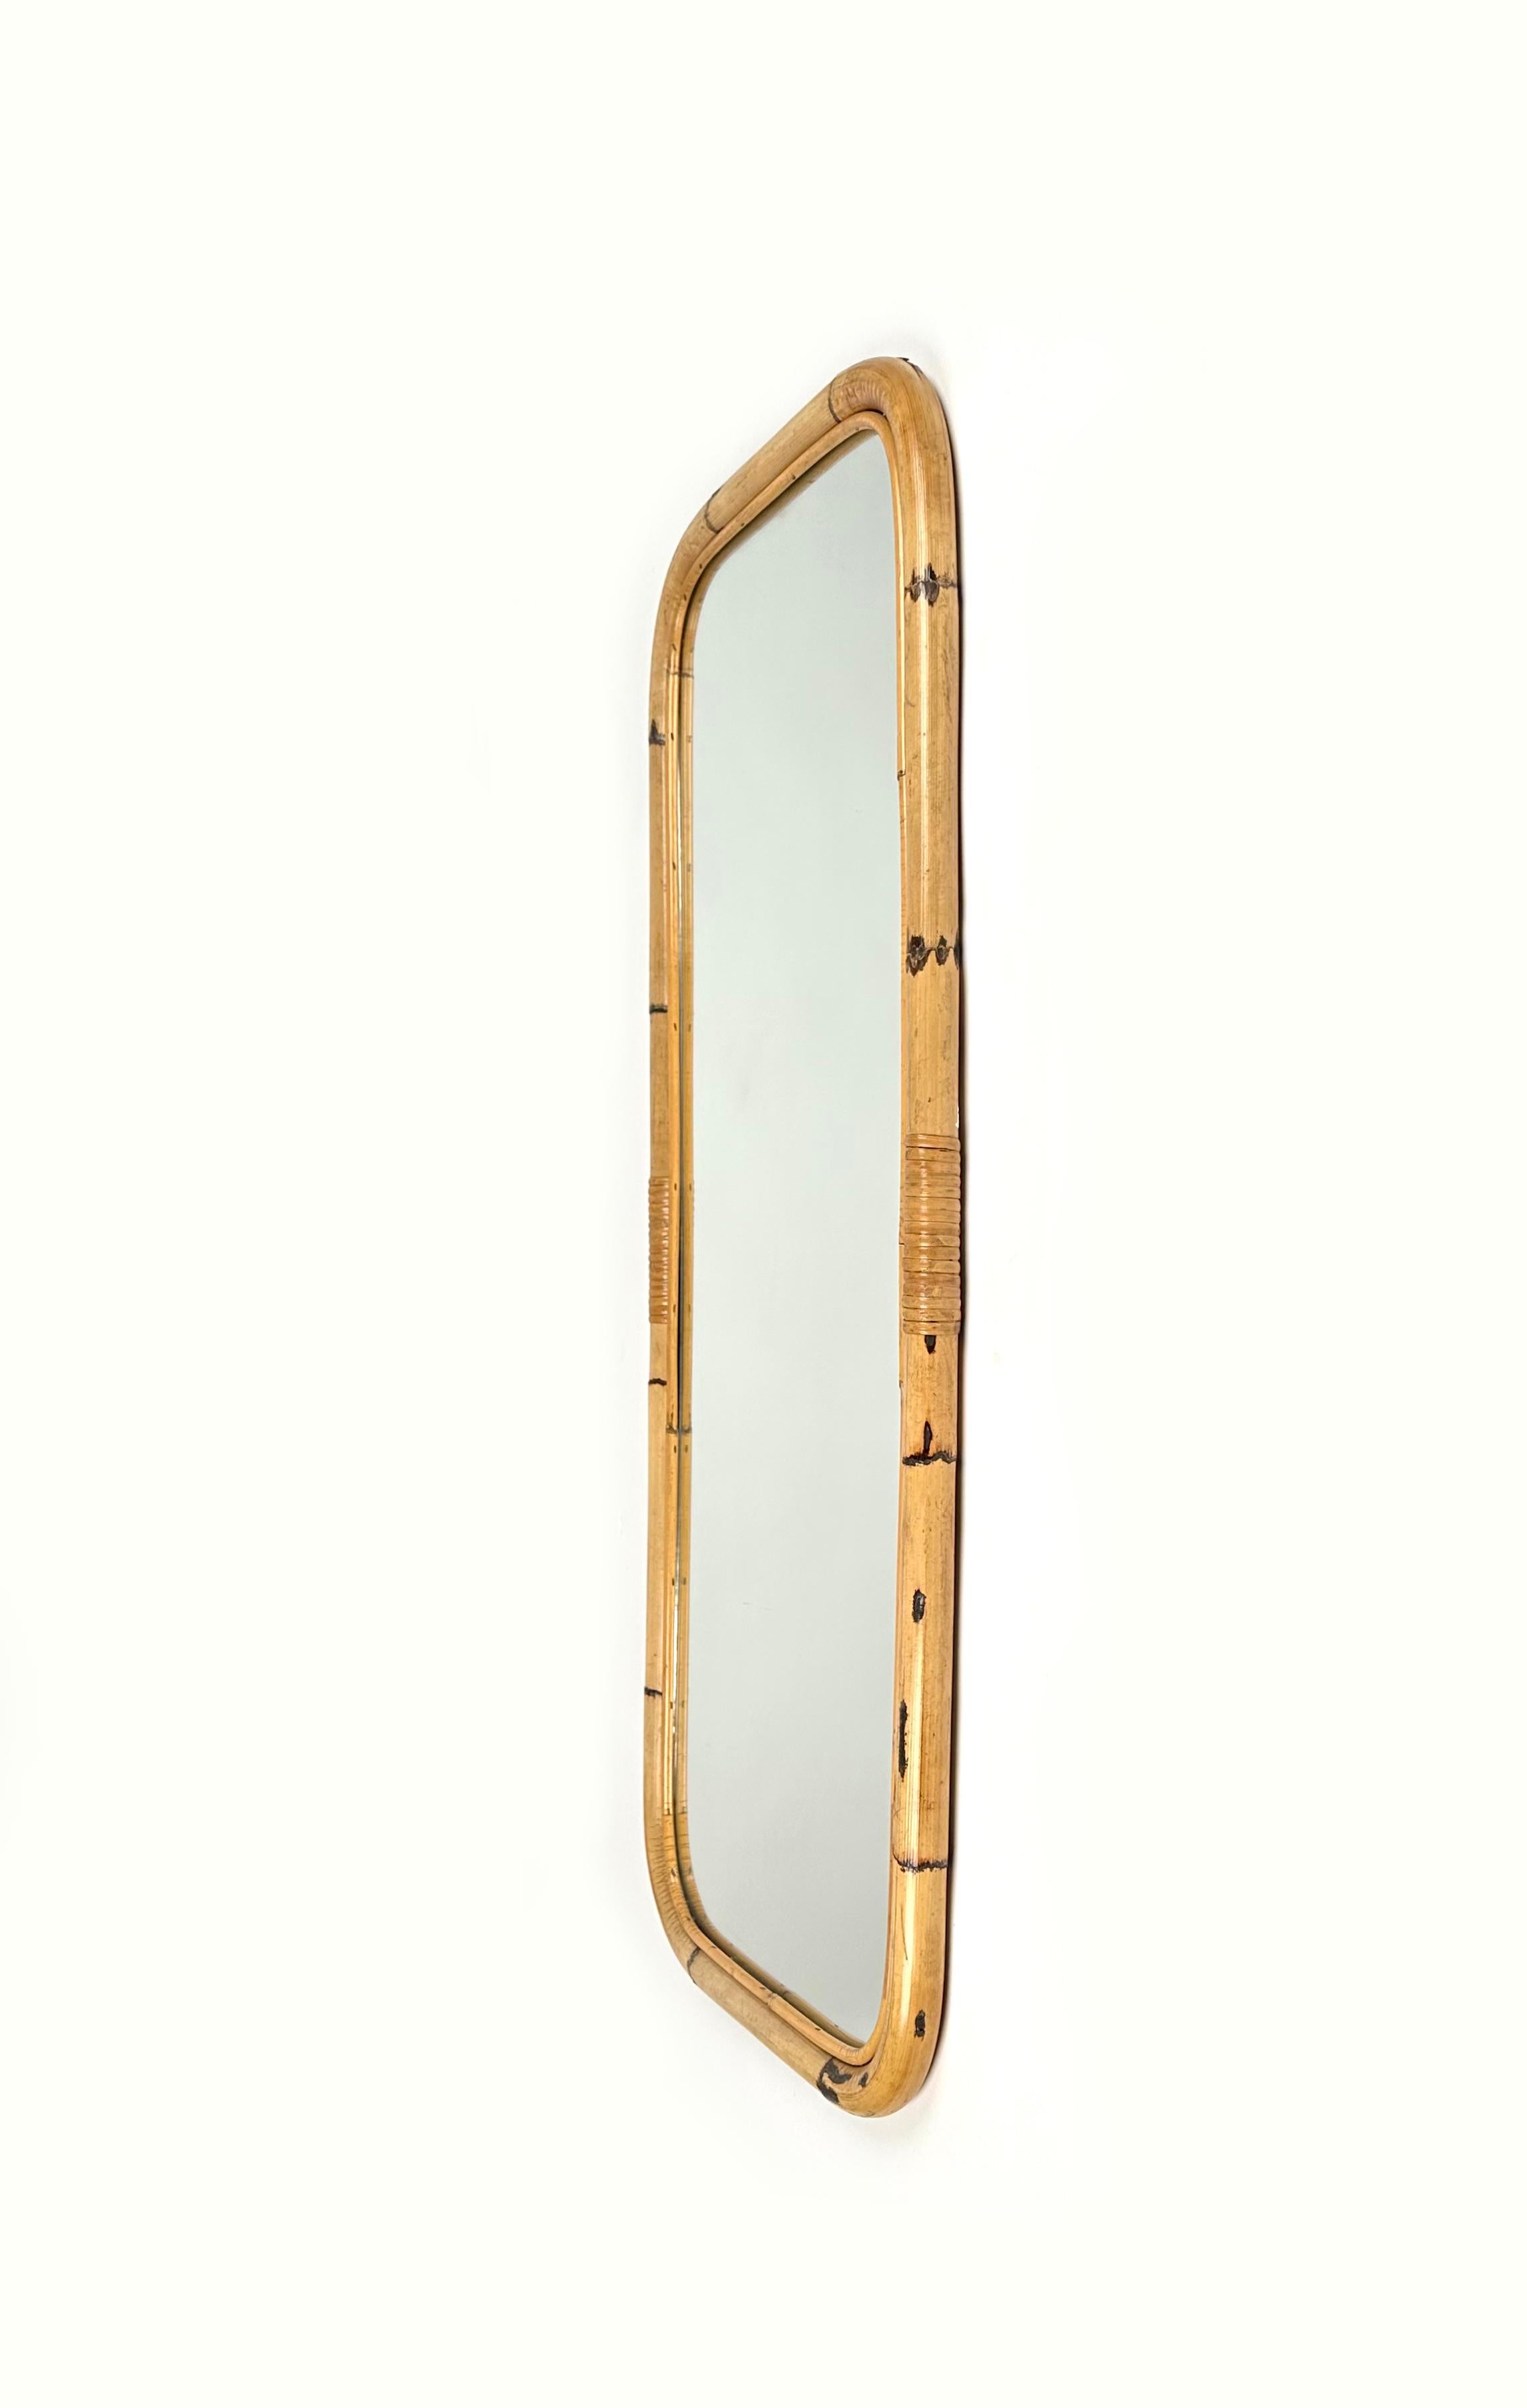 Mid-20th Century Midcentury Bamboo and Rattan Rectangular Wall Mirror, Italy, 1960s For Sale